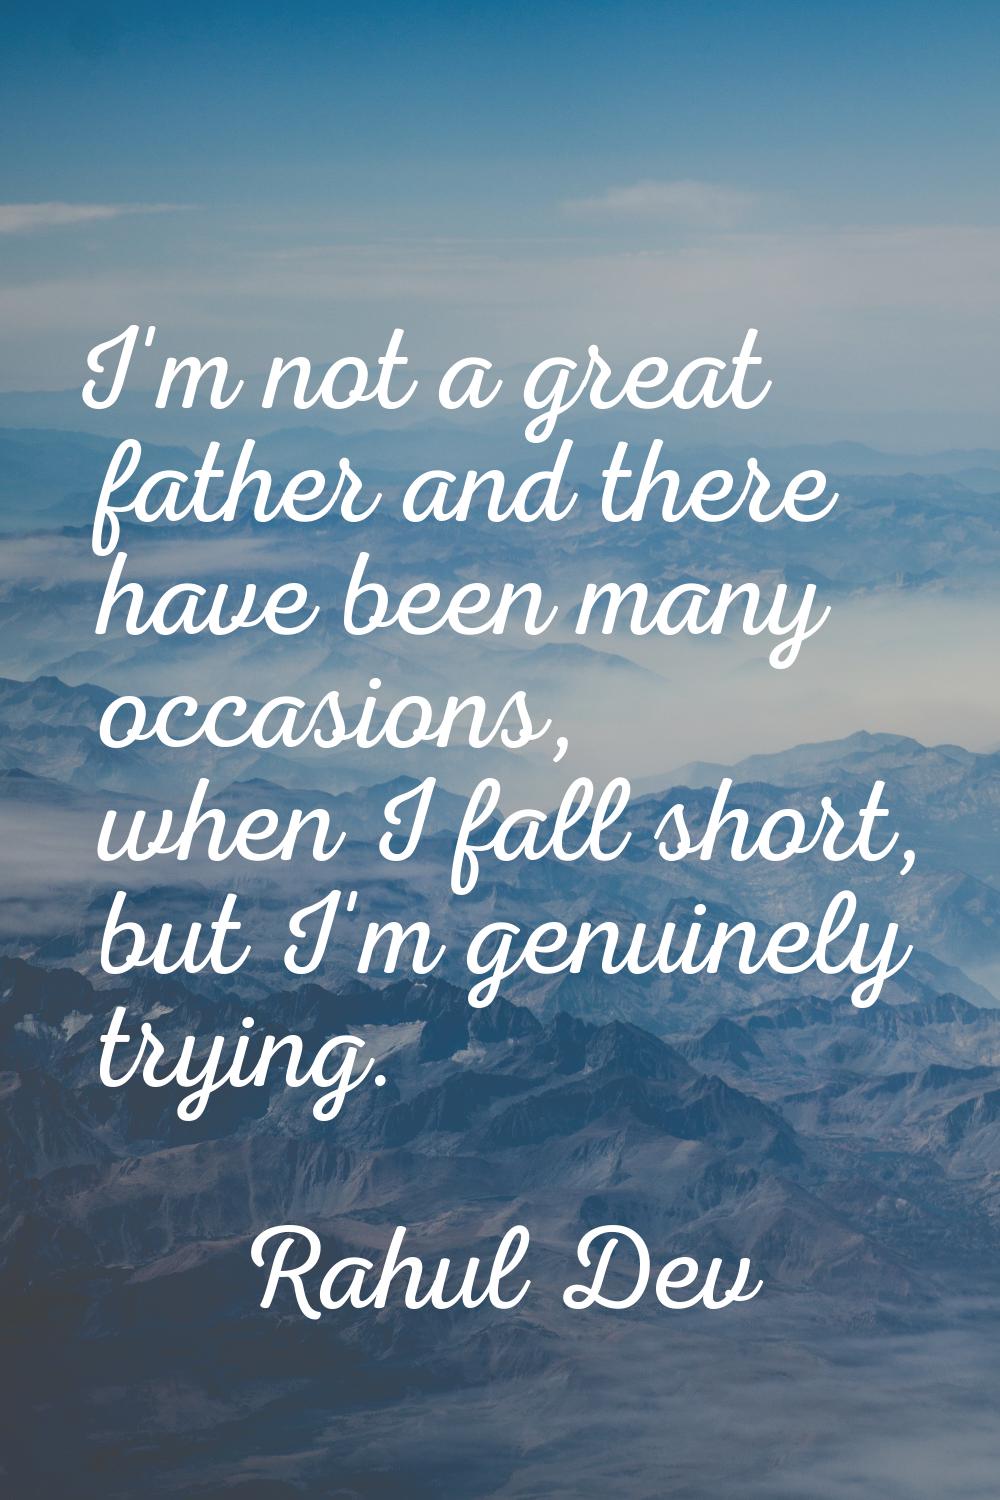 I'm not a great father and there have been many occasions, when I fall short, but I'm genuinely try